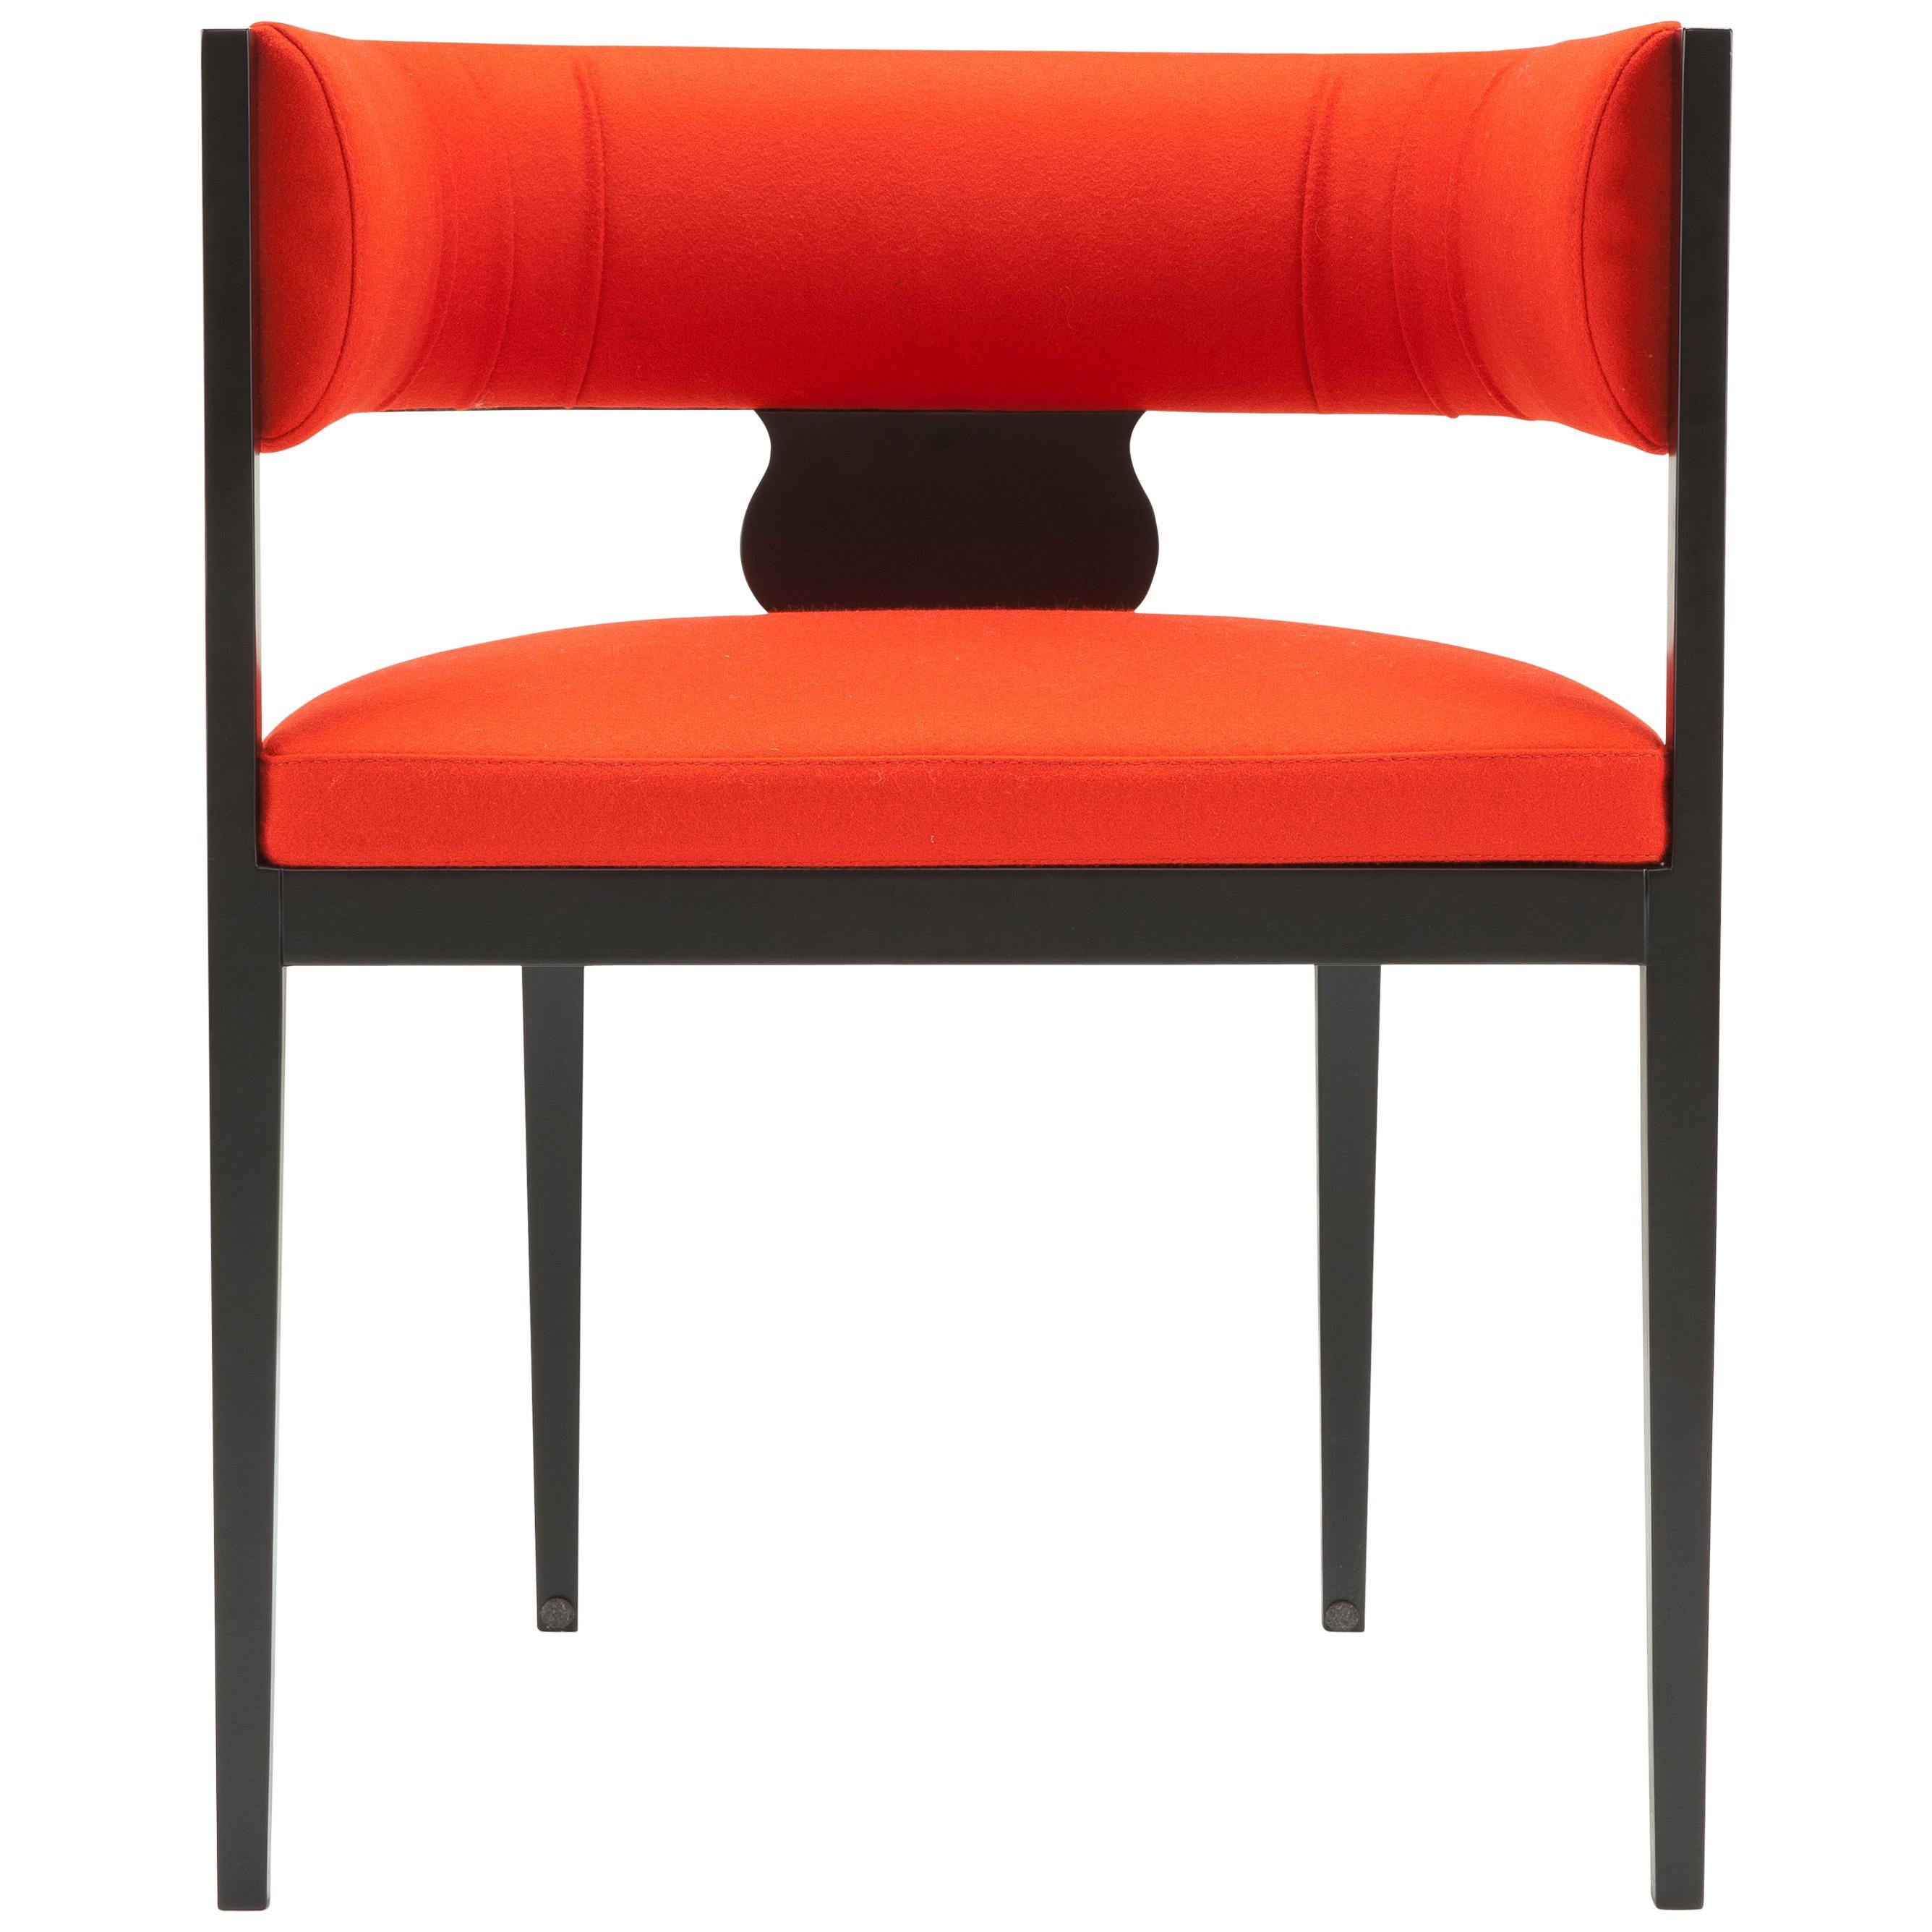 Amura 'Lira' Armchair in Red-Orange with Wooden Frame